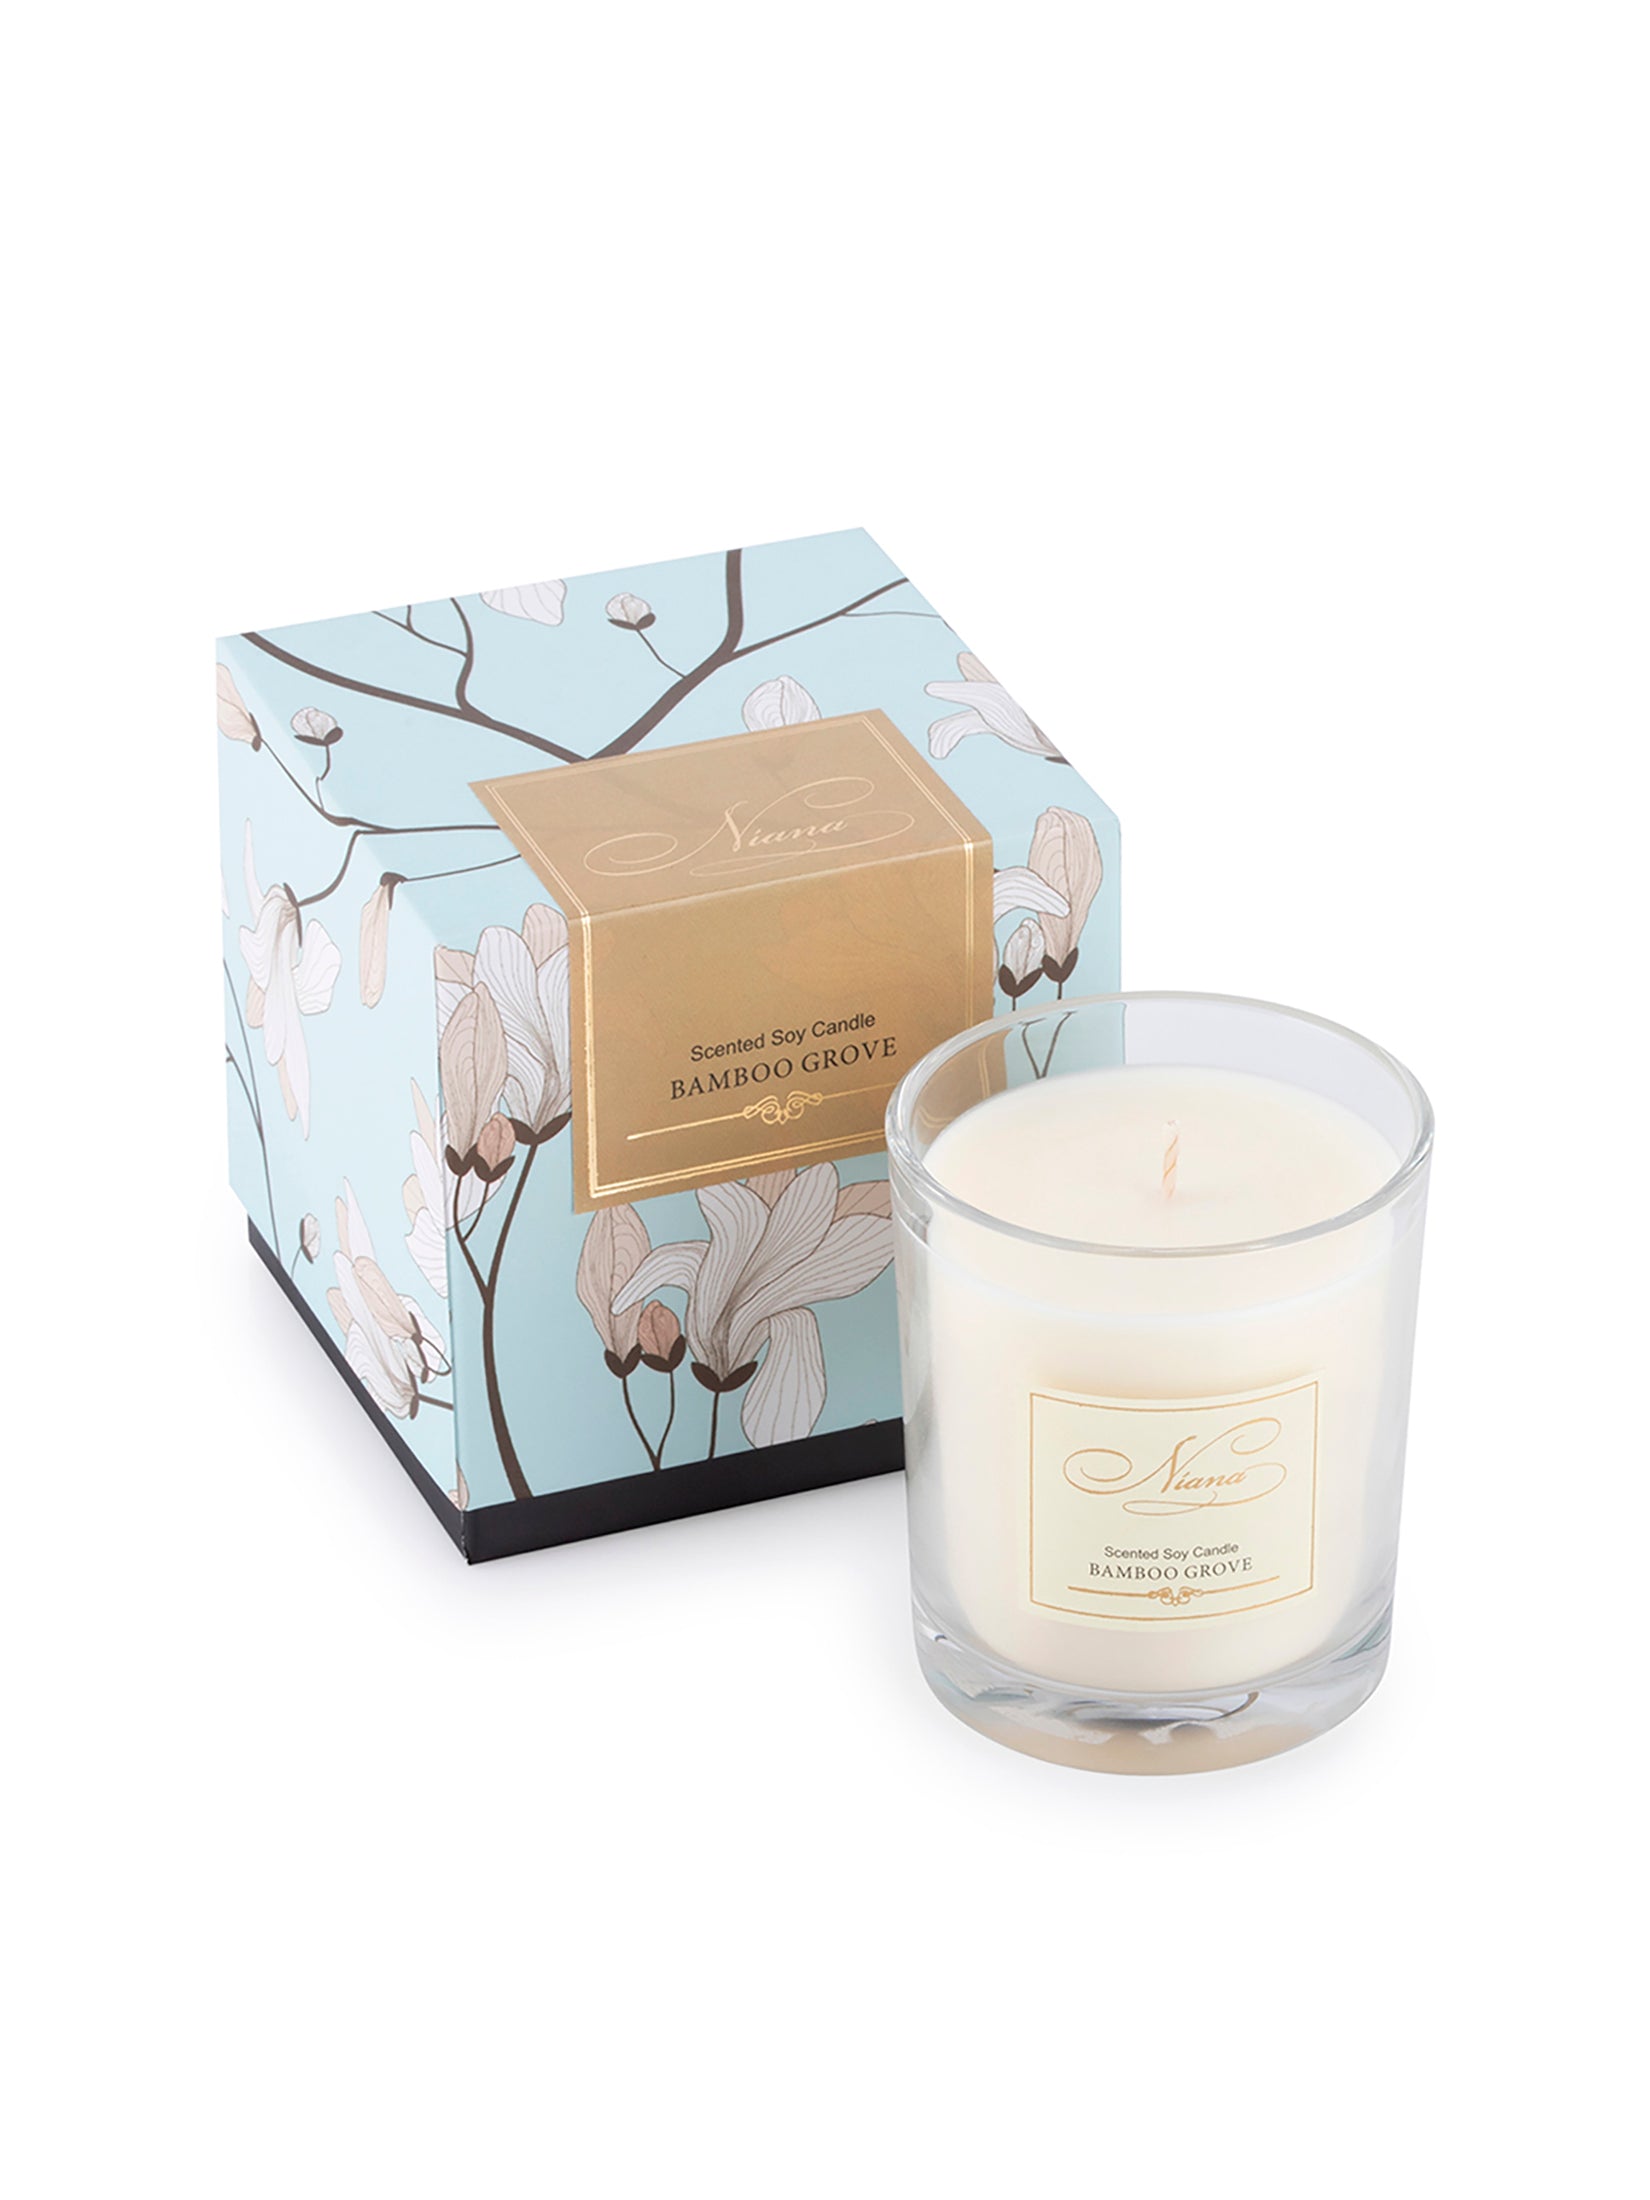 Bamboo Grove Candle